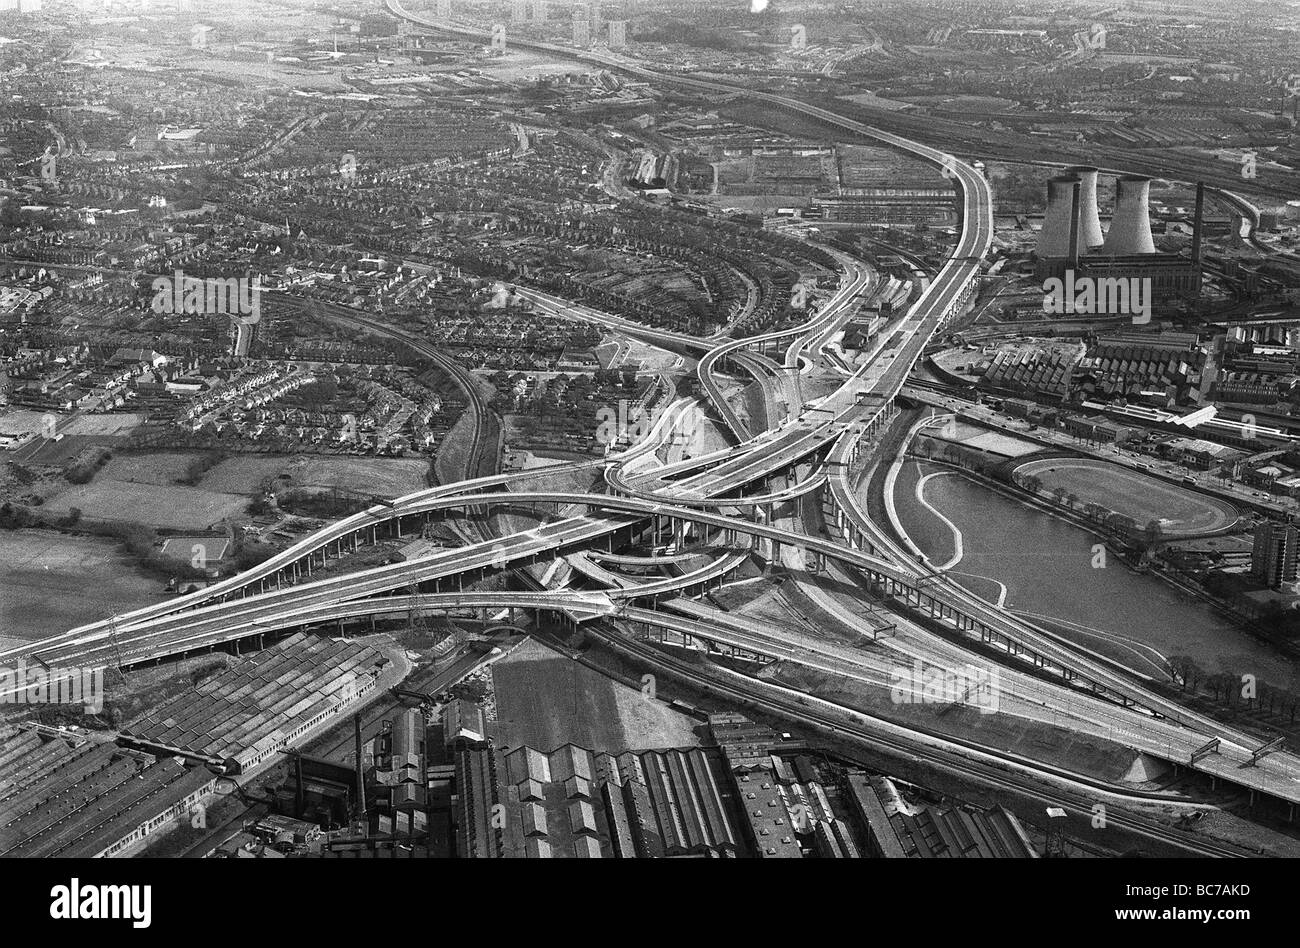 Spaghetti Junction of the M6 in Birmingham under construction in 1972 Looking southwards. M6 motorway motorways intersection aerial view elevated sect Stock Photo